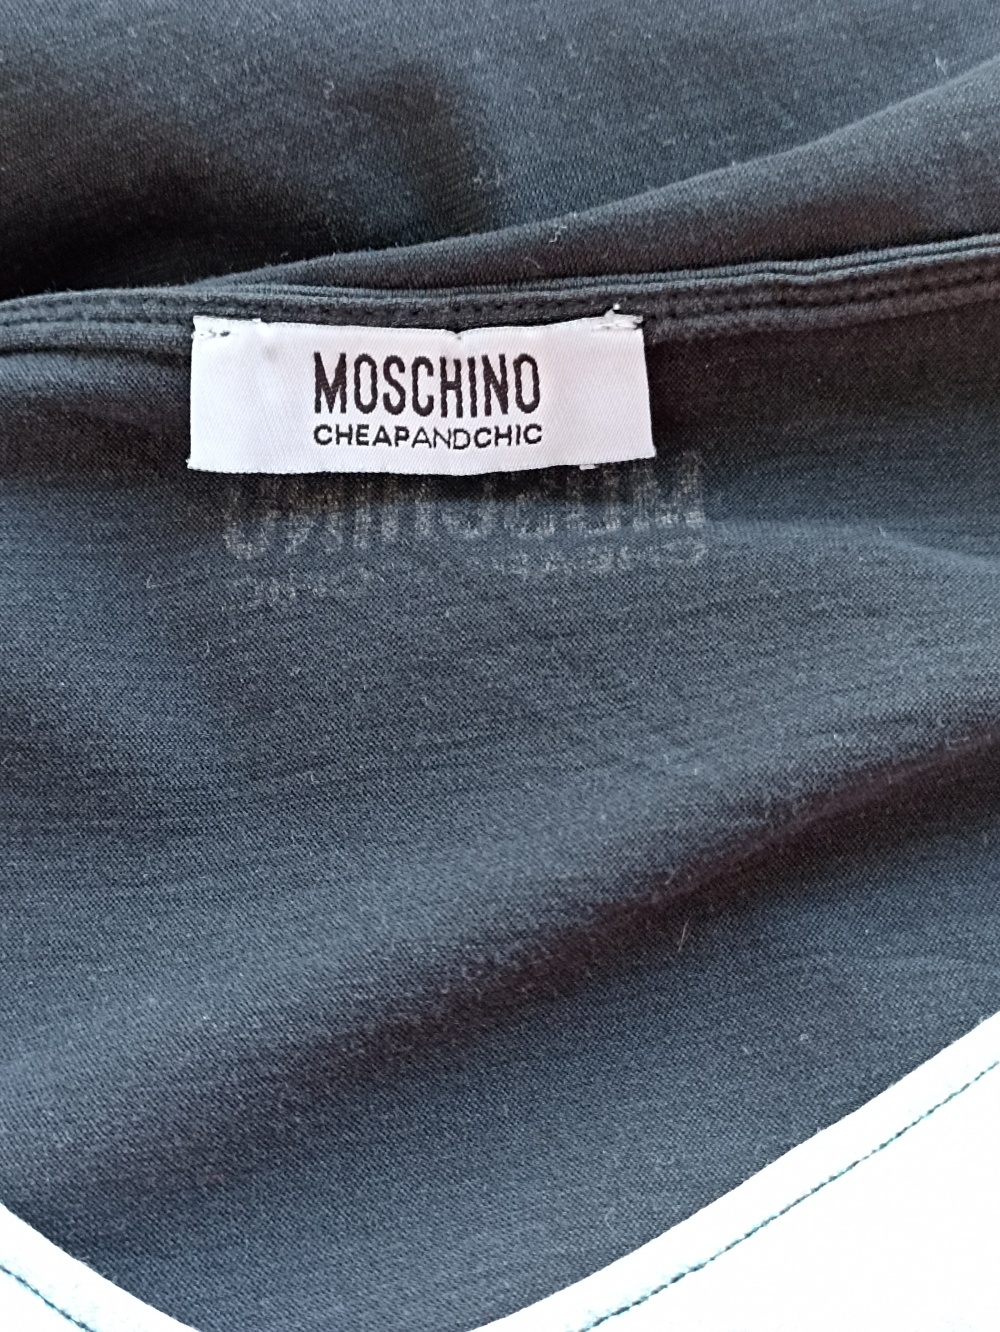 Блузка moschino cheap and chic IT 44